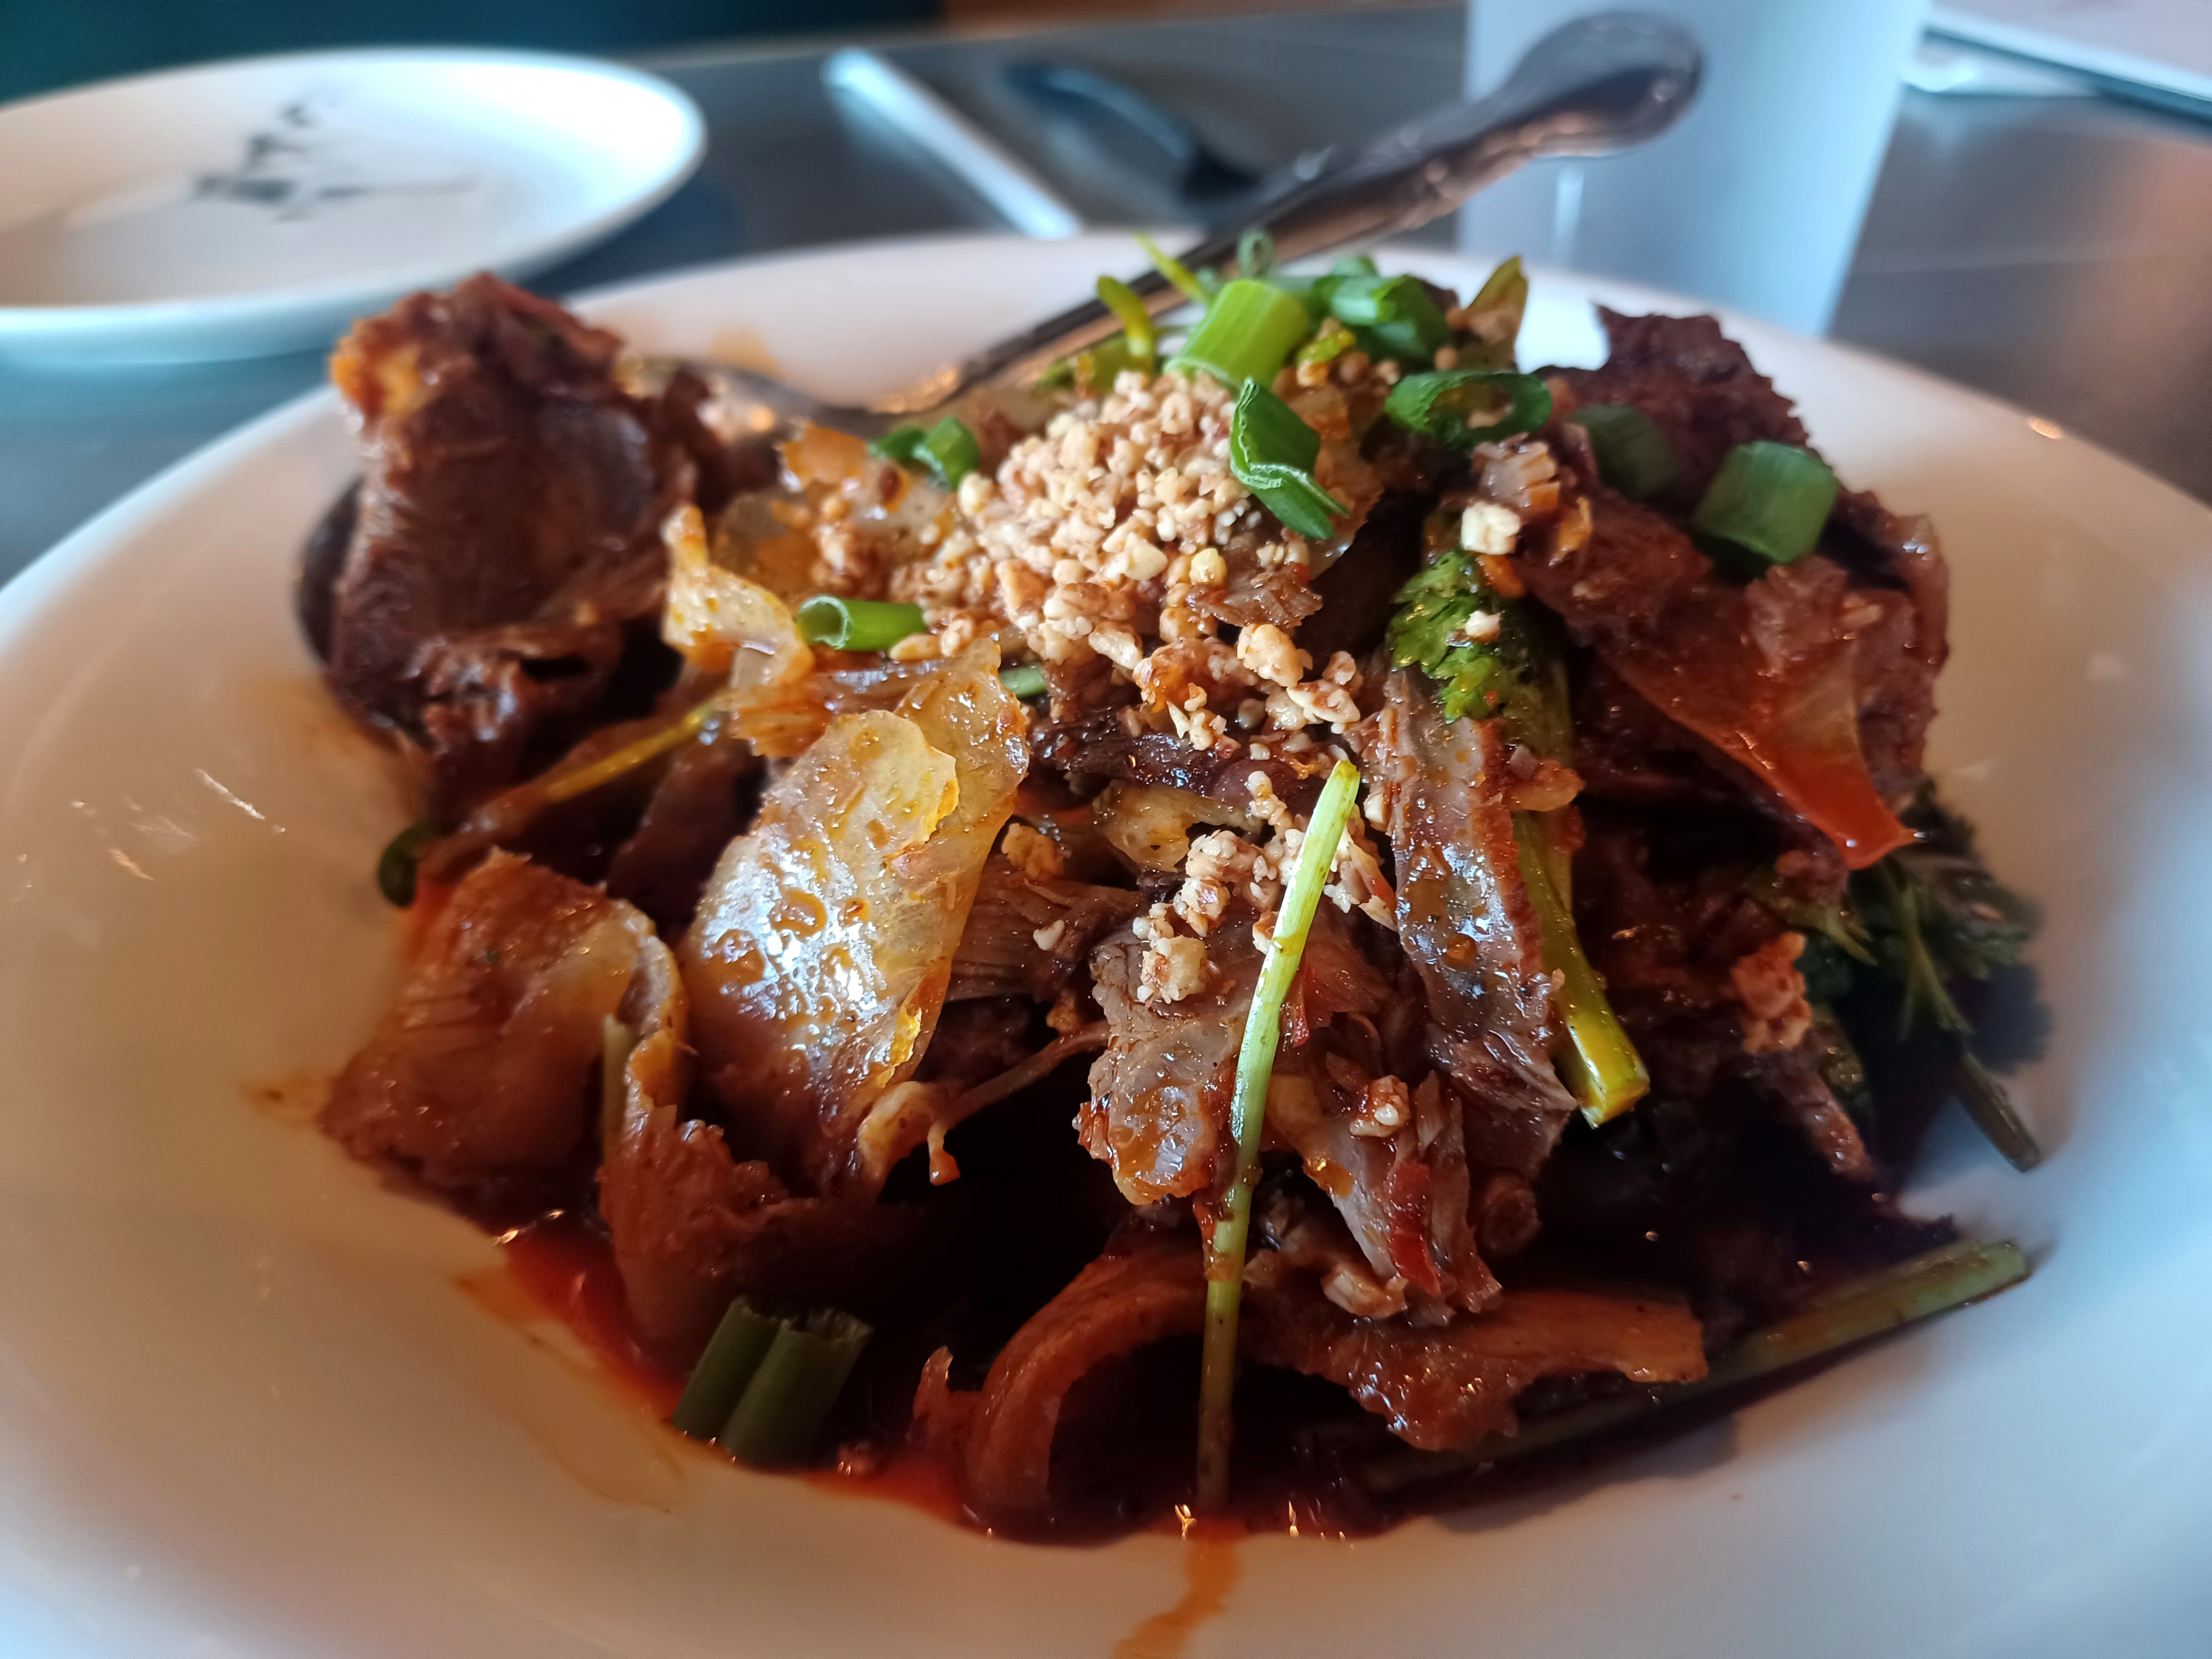 Sliced beef and ox tongue with chili sauce, layered with flavors heady and bright and textures slick, chewy and crunchy make for an addictive appetizer. (Amy Drew Thompson/Orlando Sentinel)